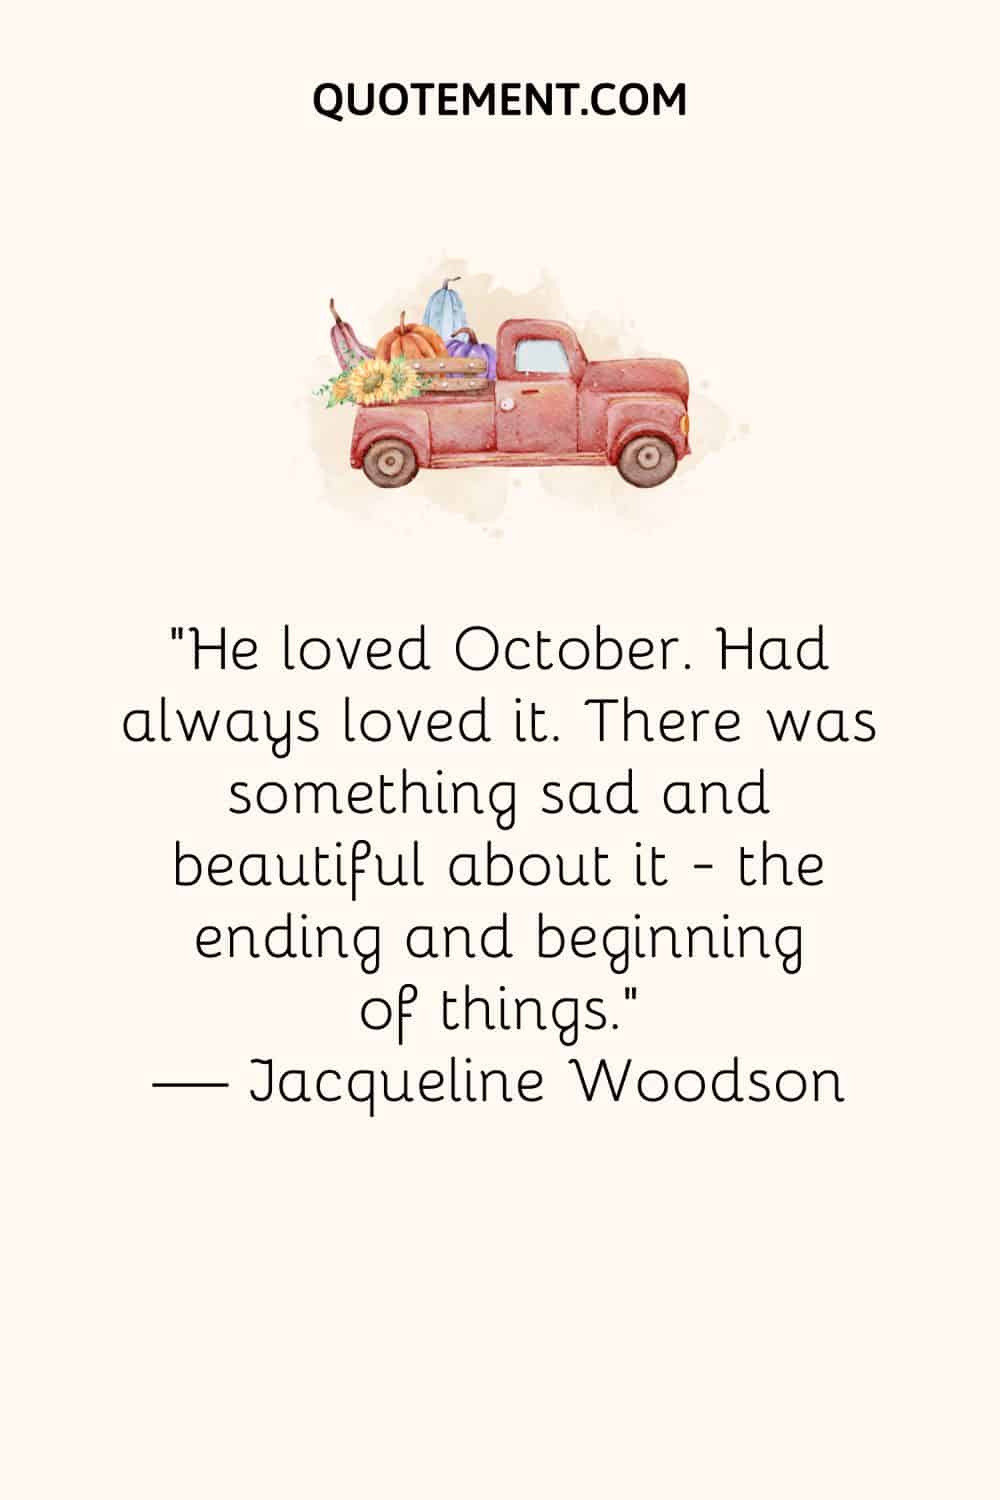 He loved October. Had always loved it. There was something sad and beautiful about it — the ending and beginning of things